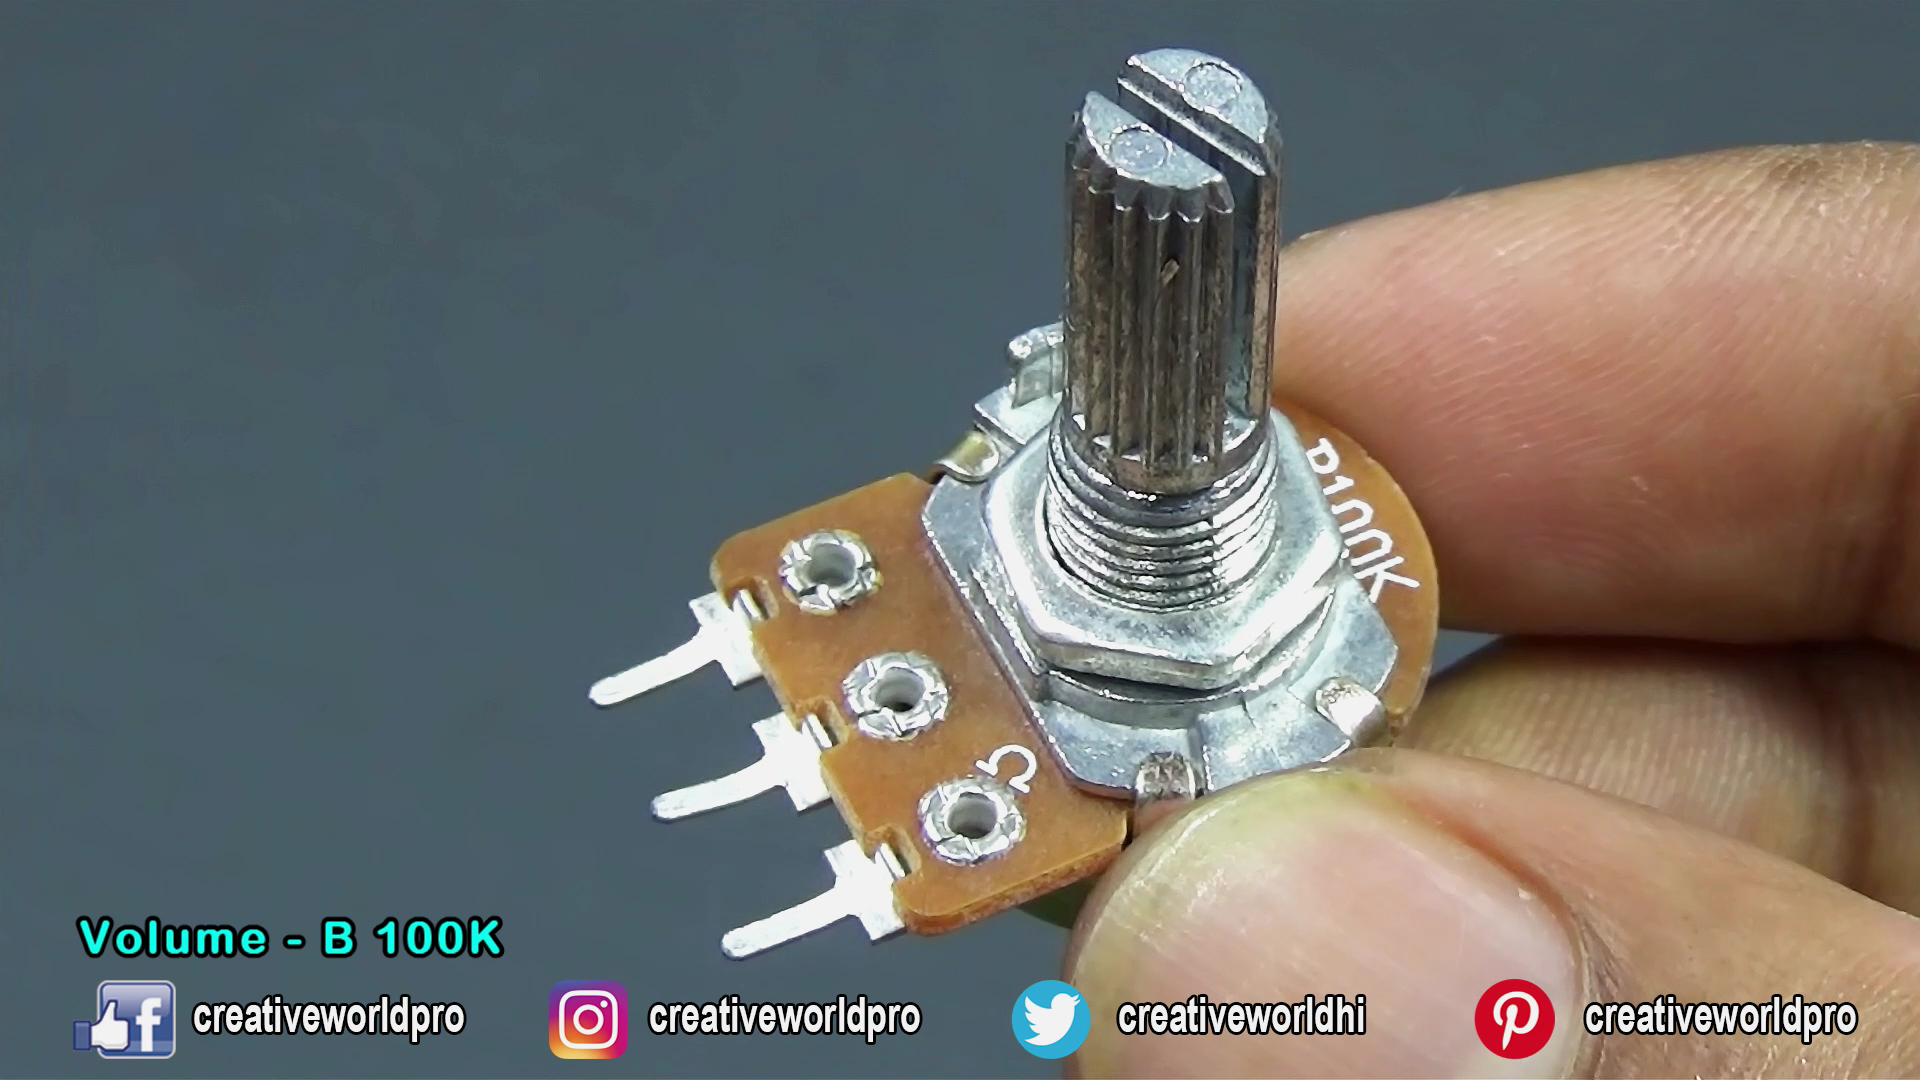 Top 2 Mini Amplifier Circuit In 2021 - DC 12v.mp4_000178200.png